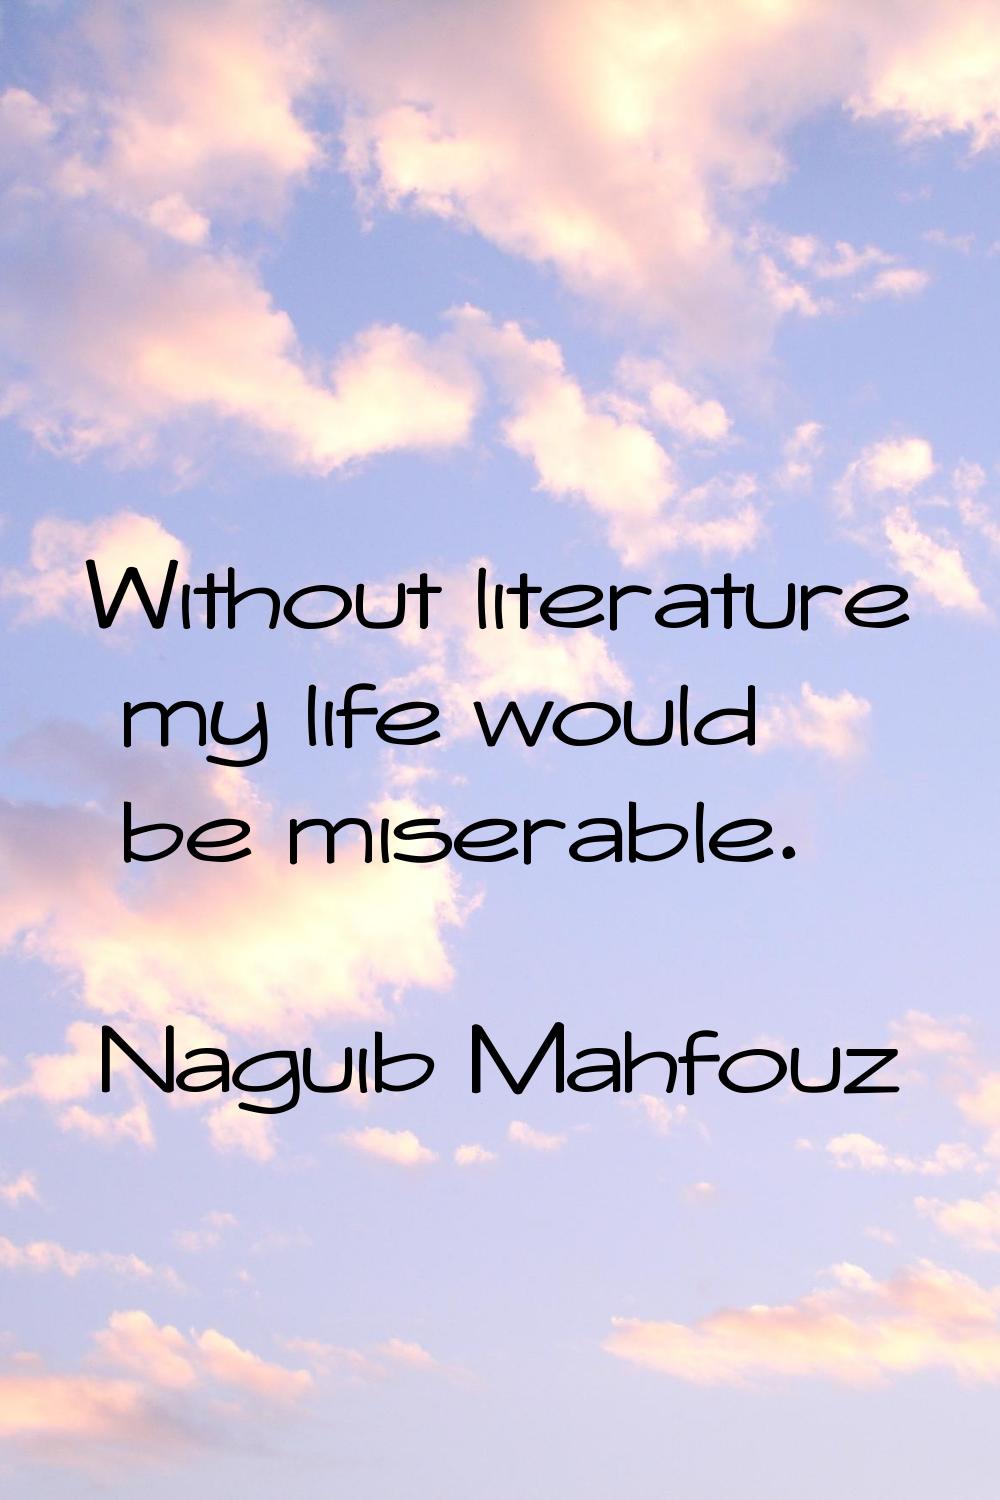 Without literature my life would be miserable.